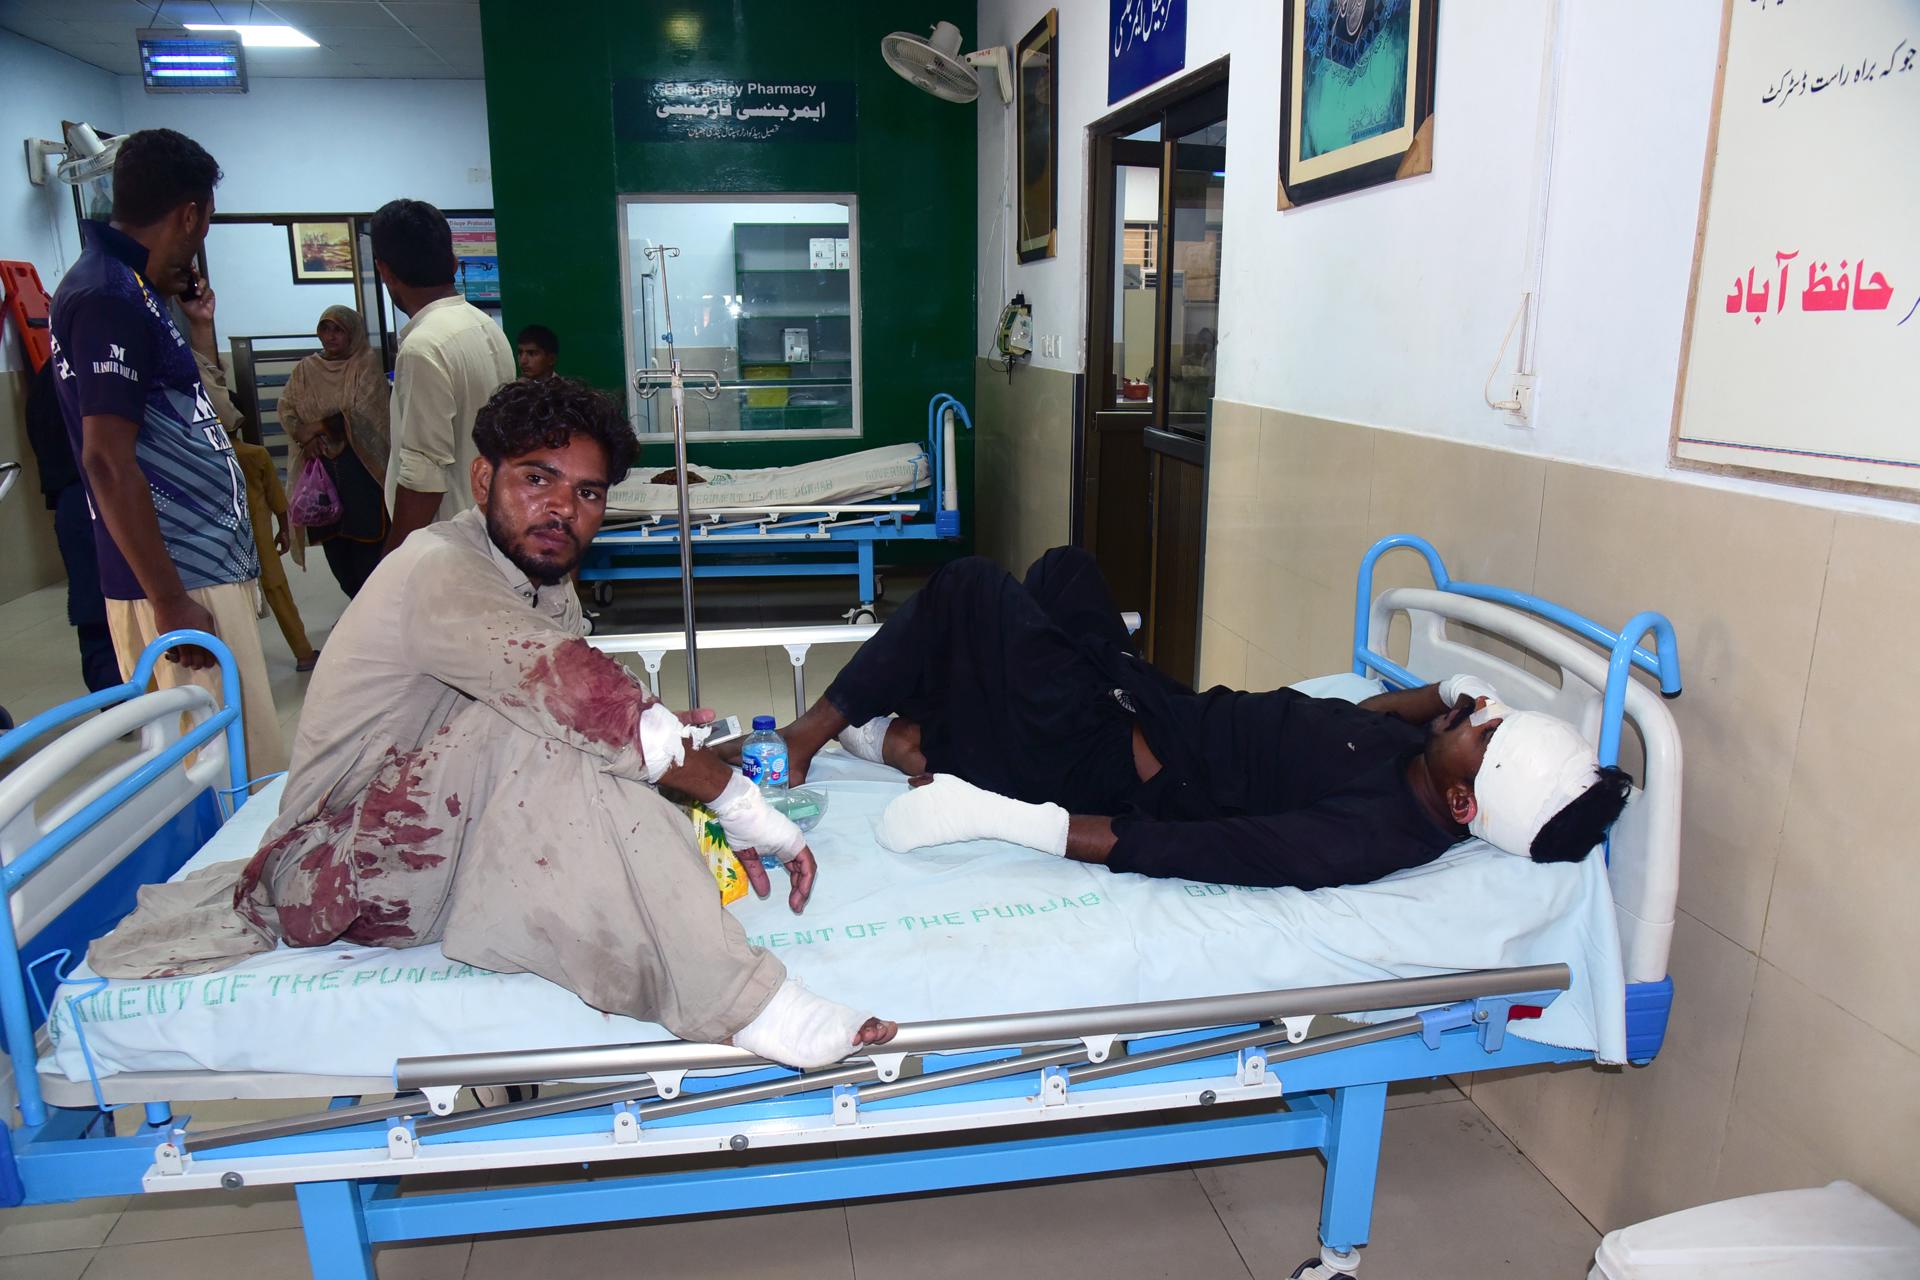 People who were injured in a bus accident receive treatment at a hospital in Pindi Bhattian, Pakistan, 20 August 2023. EFE/EPA/ISRAR UL HAQ
